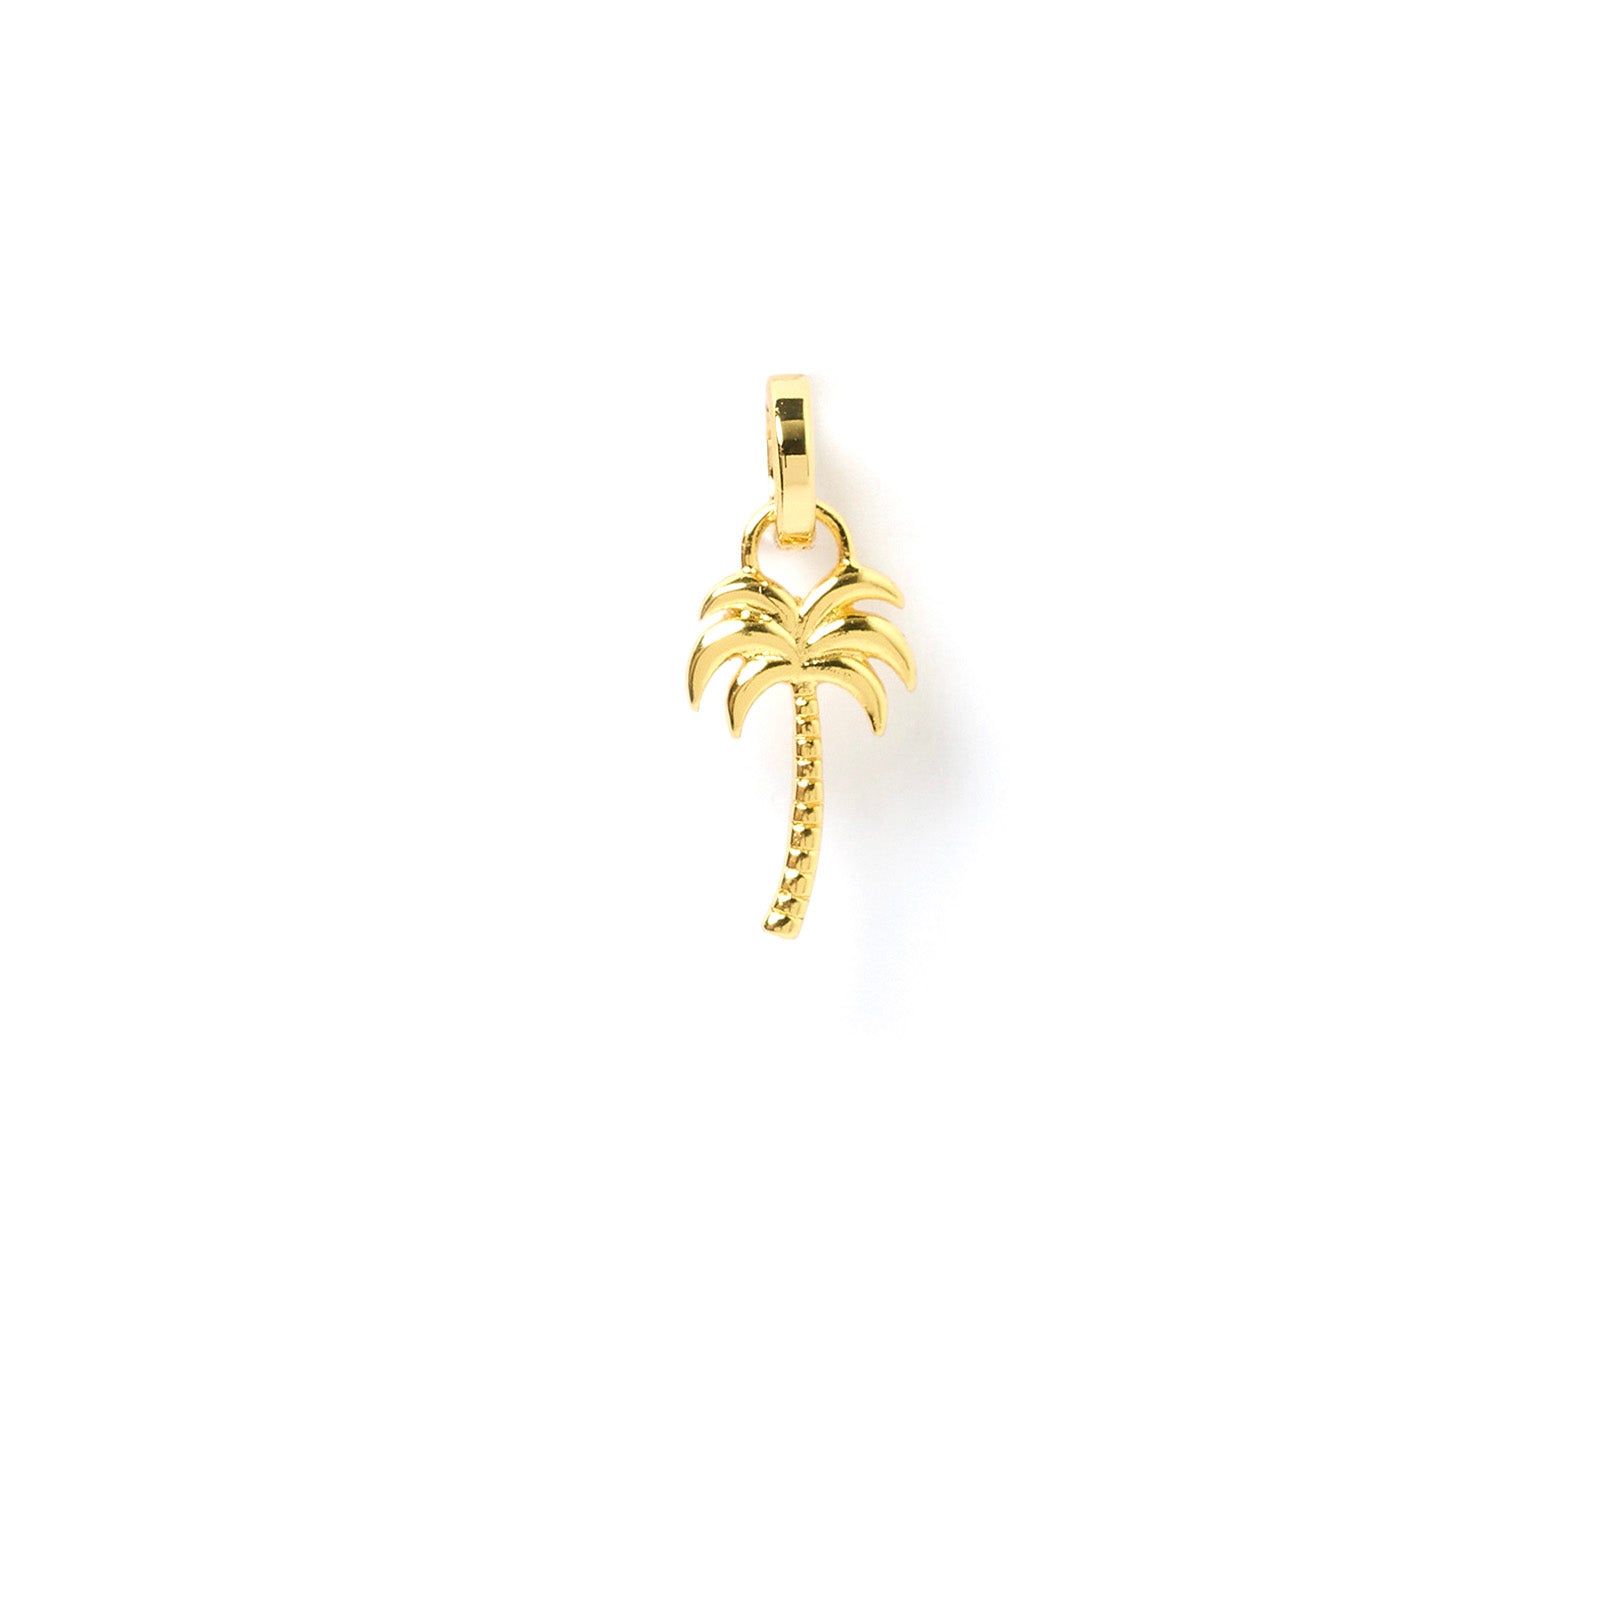 Arms Of Eve stunning Palm Springs gold palm tree charm, perfect for adding touch of summer to any outfit